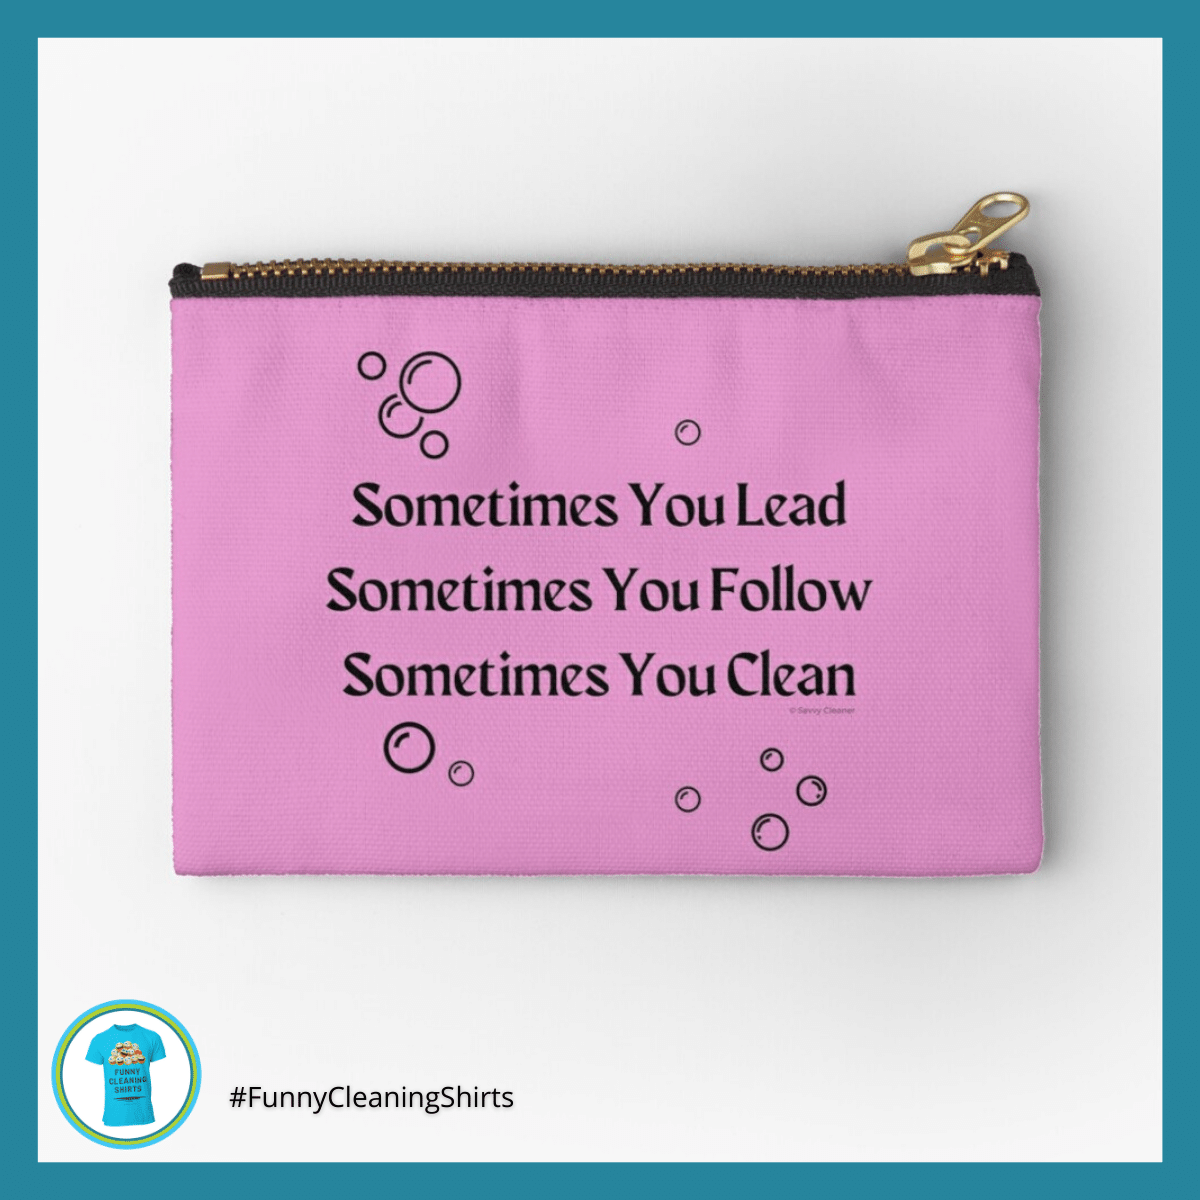 Sometimes You Lead Savvy Cleaner Funny Cleaning Shirts Zipper Pouch